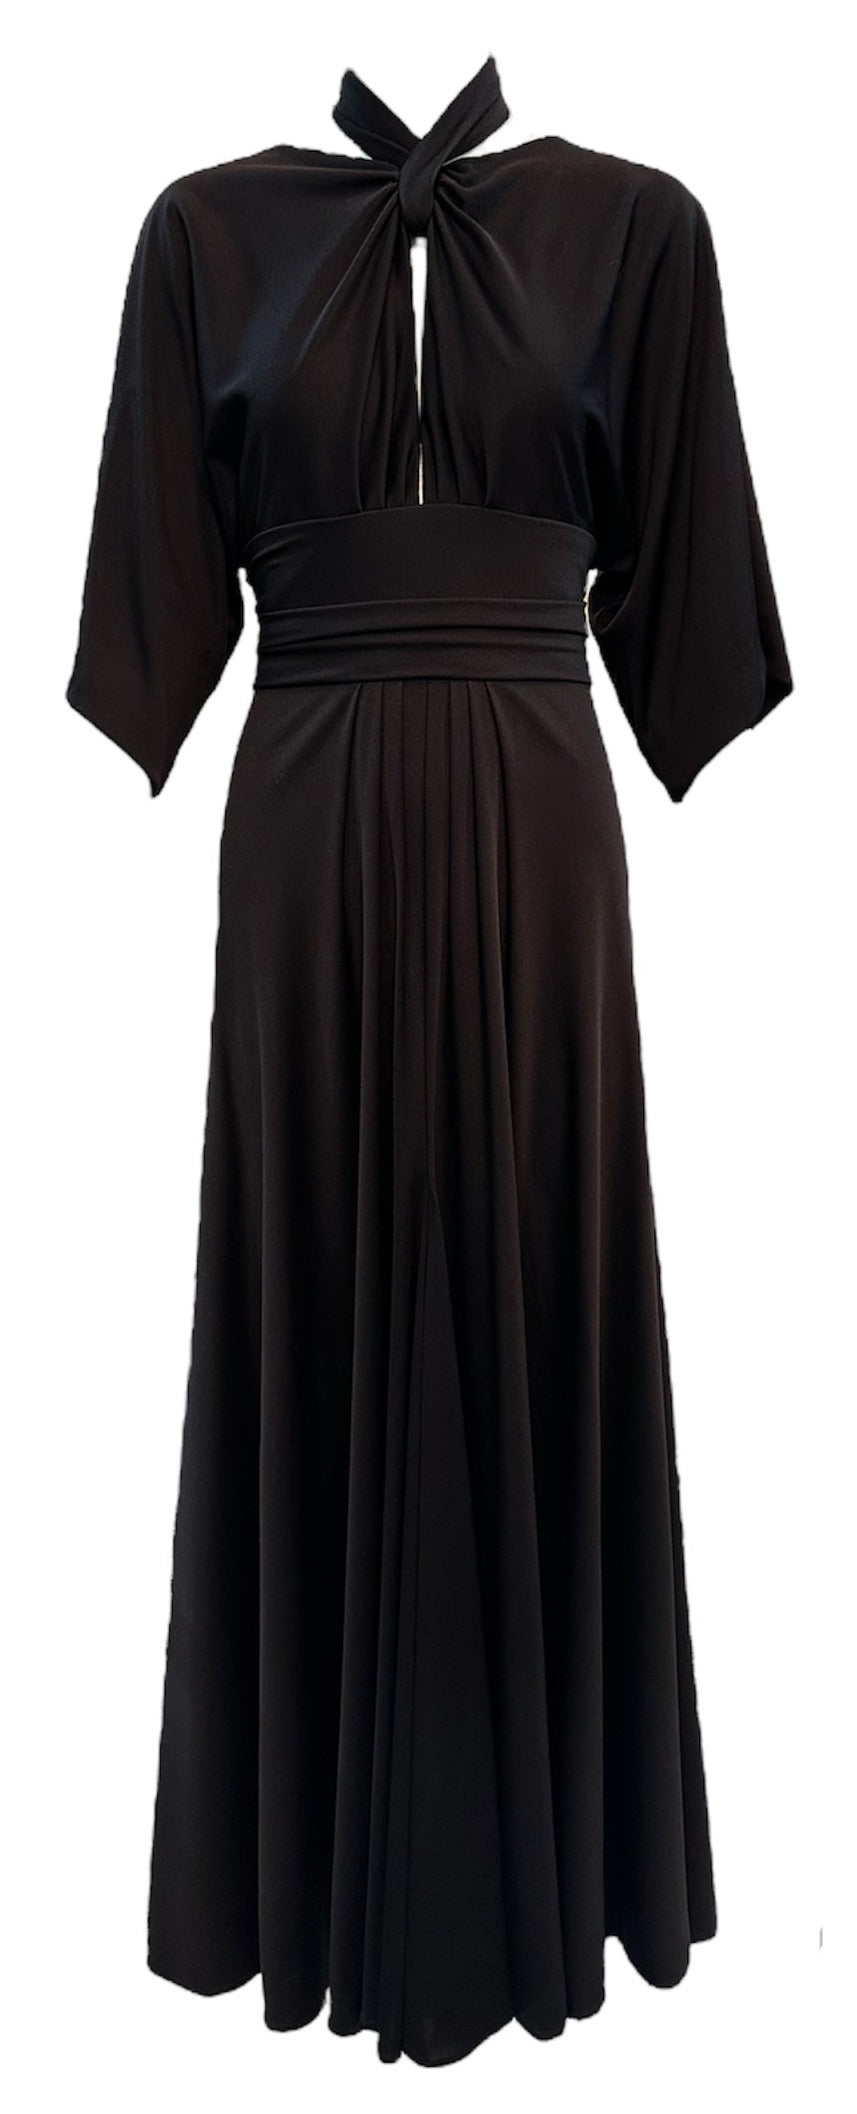  Frank Usher 70s Black Poly Maxi Dress with Interesting Neckline FRONT 1 of 6